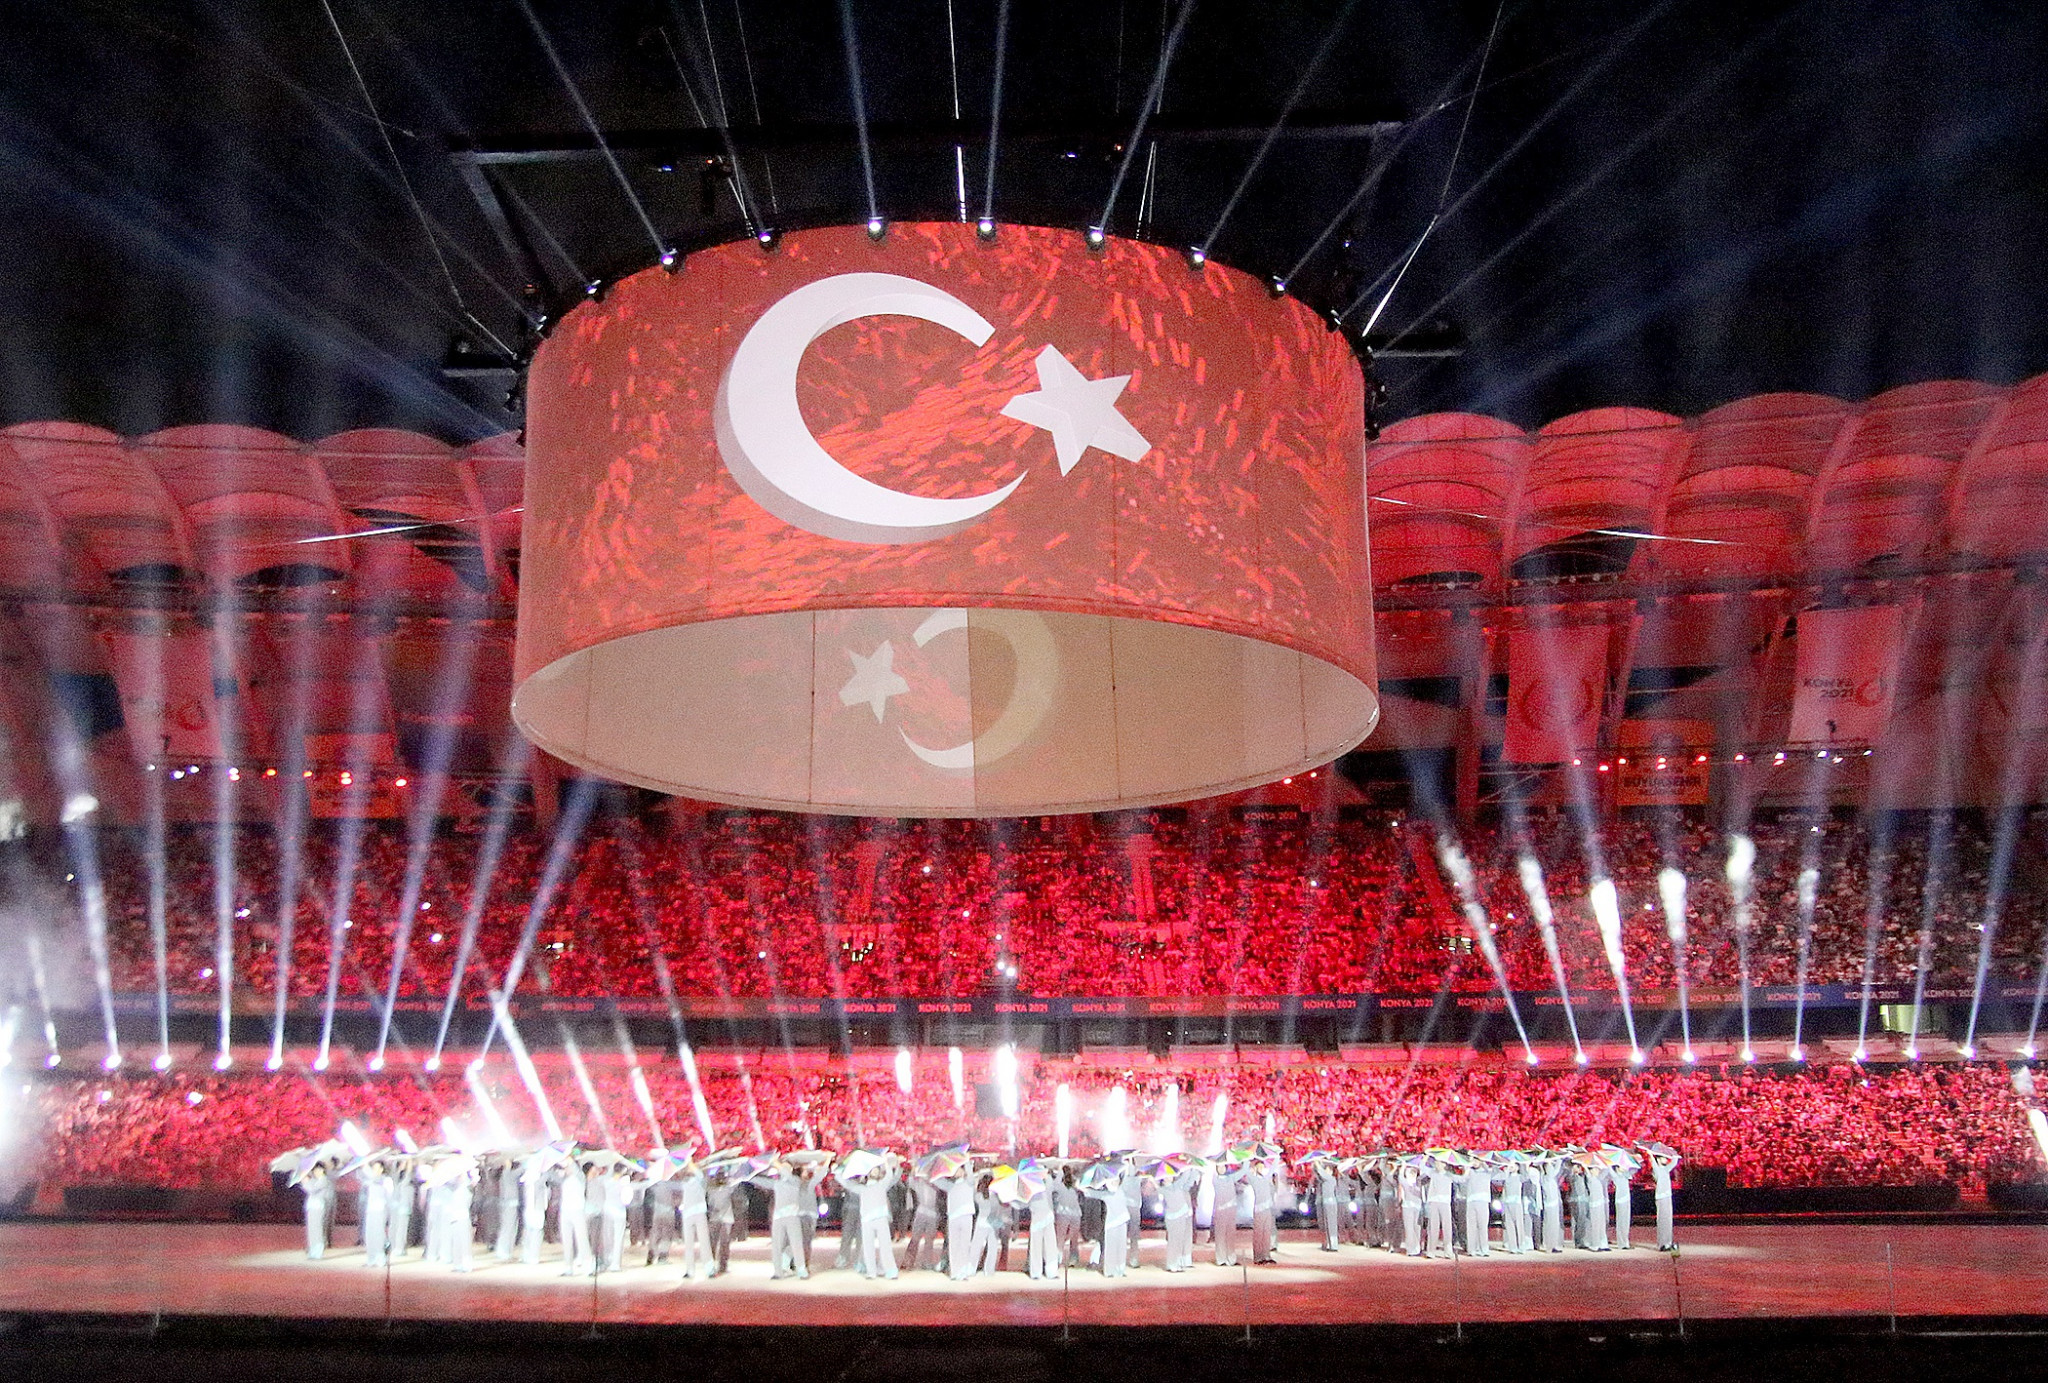 Turkey is staging the Islamic Solidarity Games for the first time and has high hopes of holding the Olympics in future ©Konya 2021